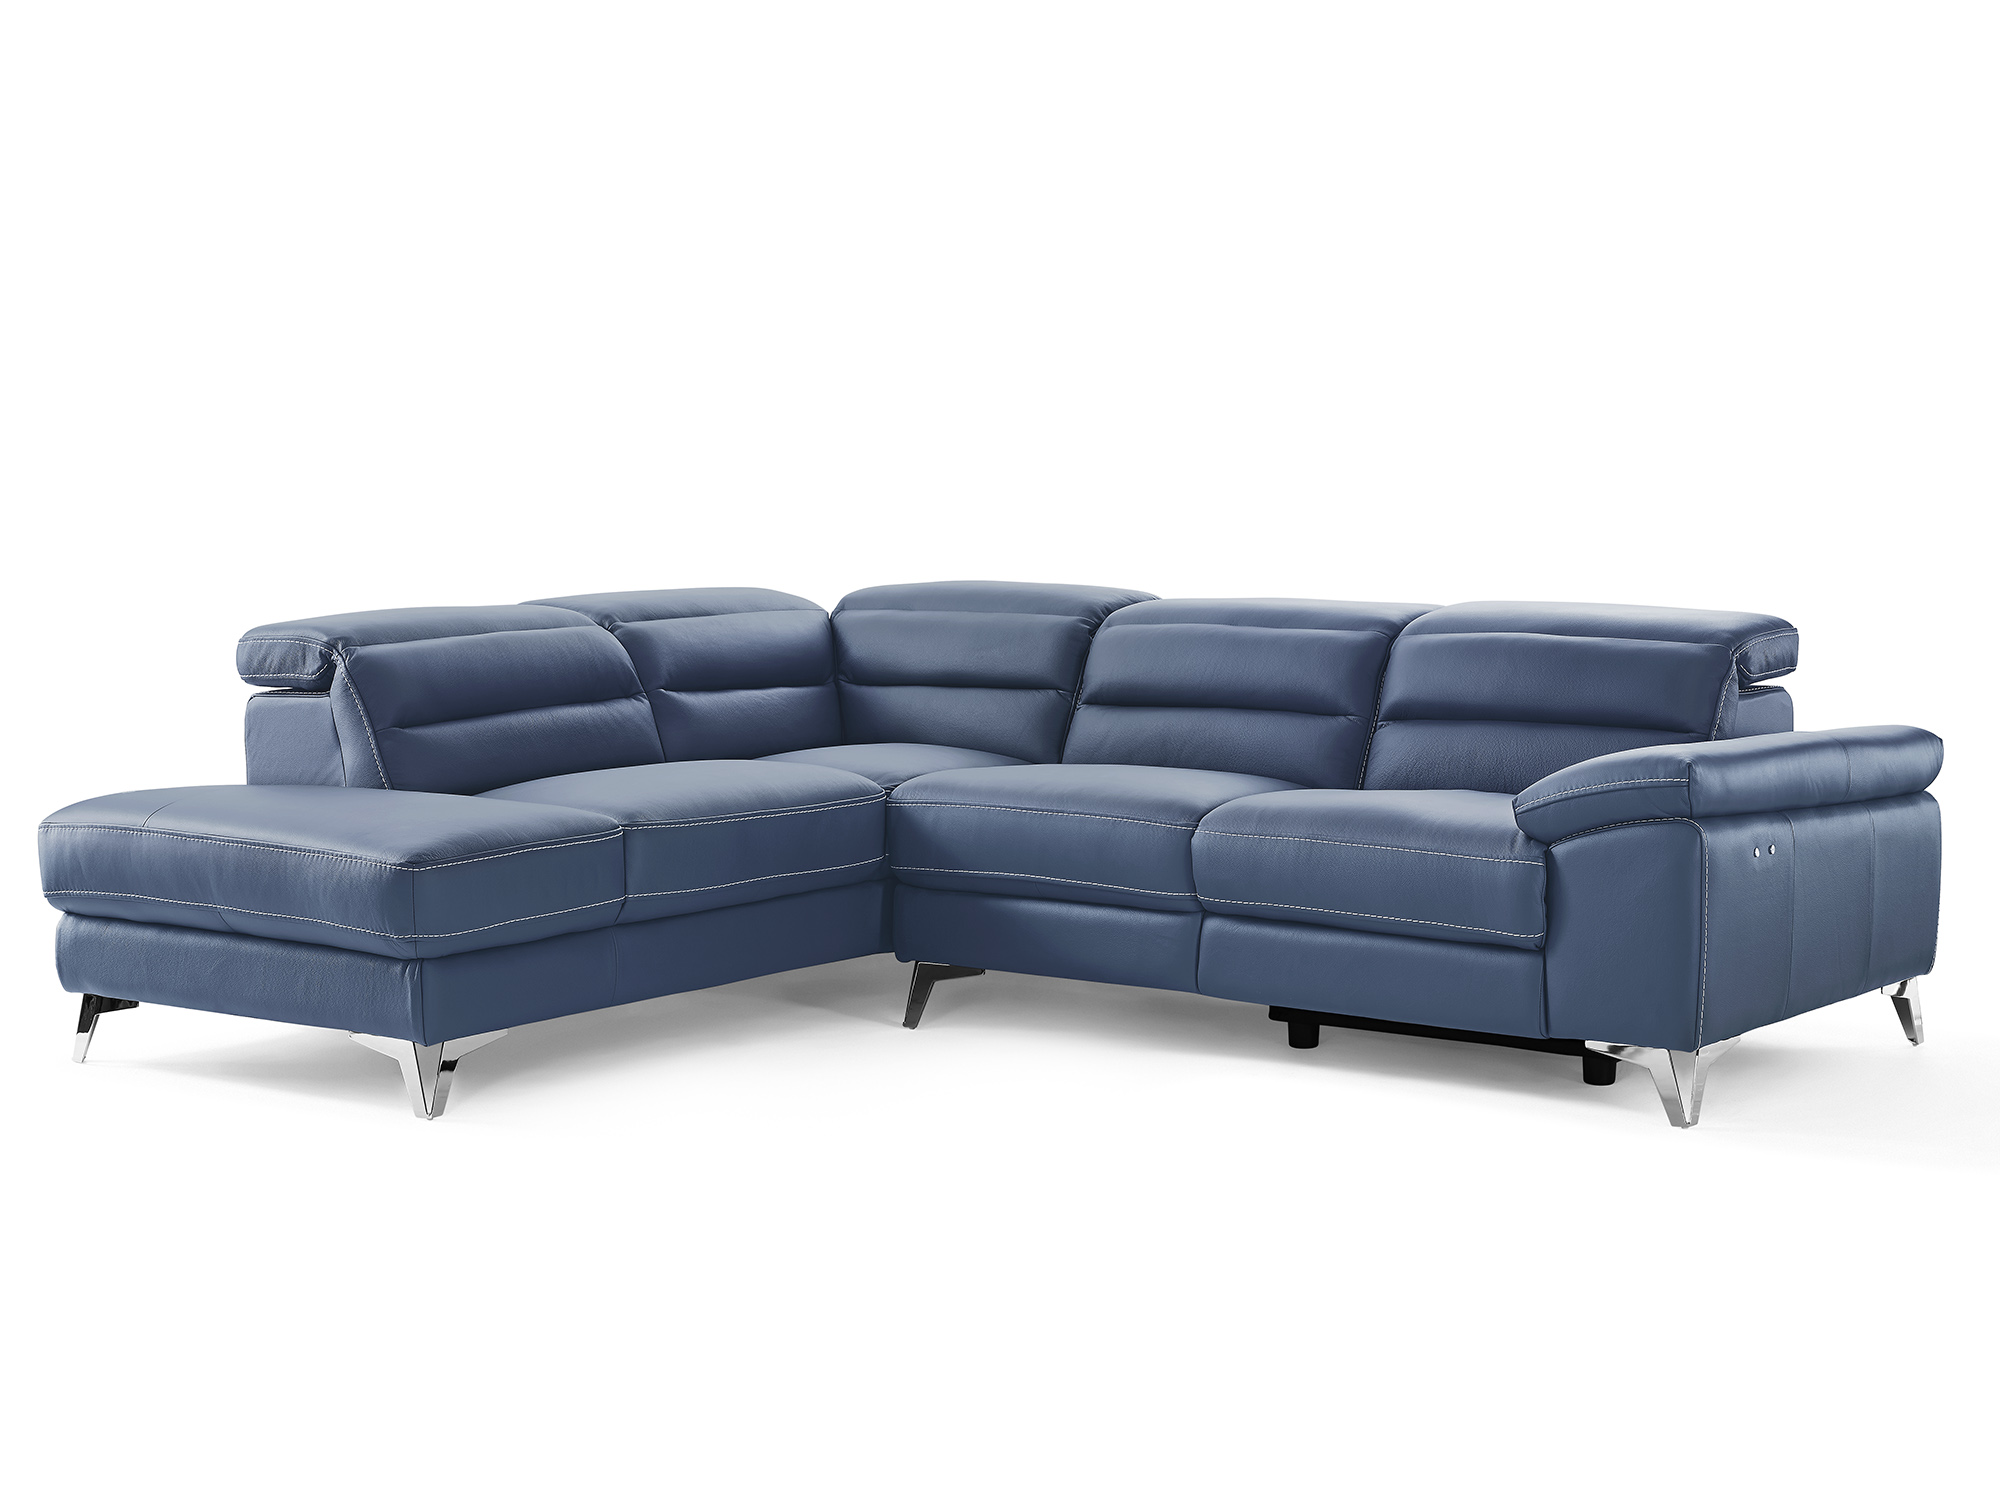 109" X 88" X 31" X 40" Navy Blue Leather Sectional